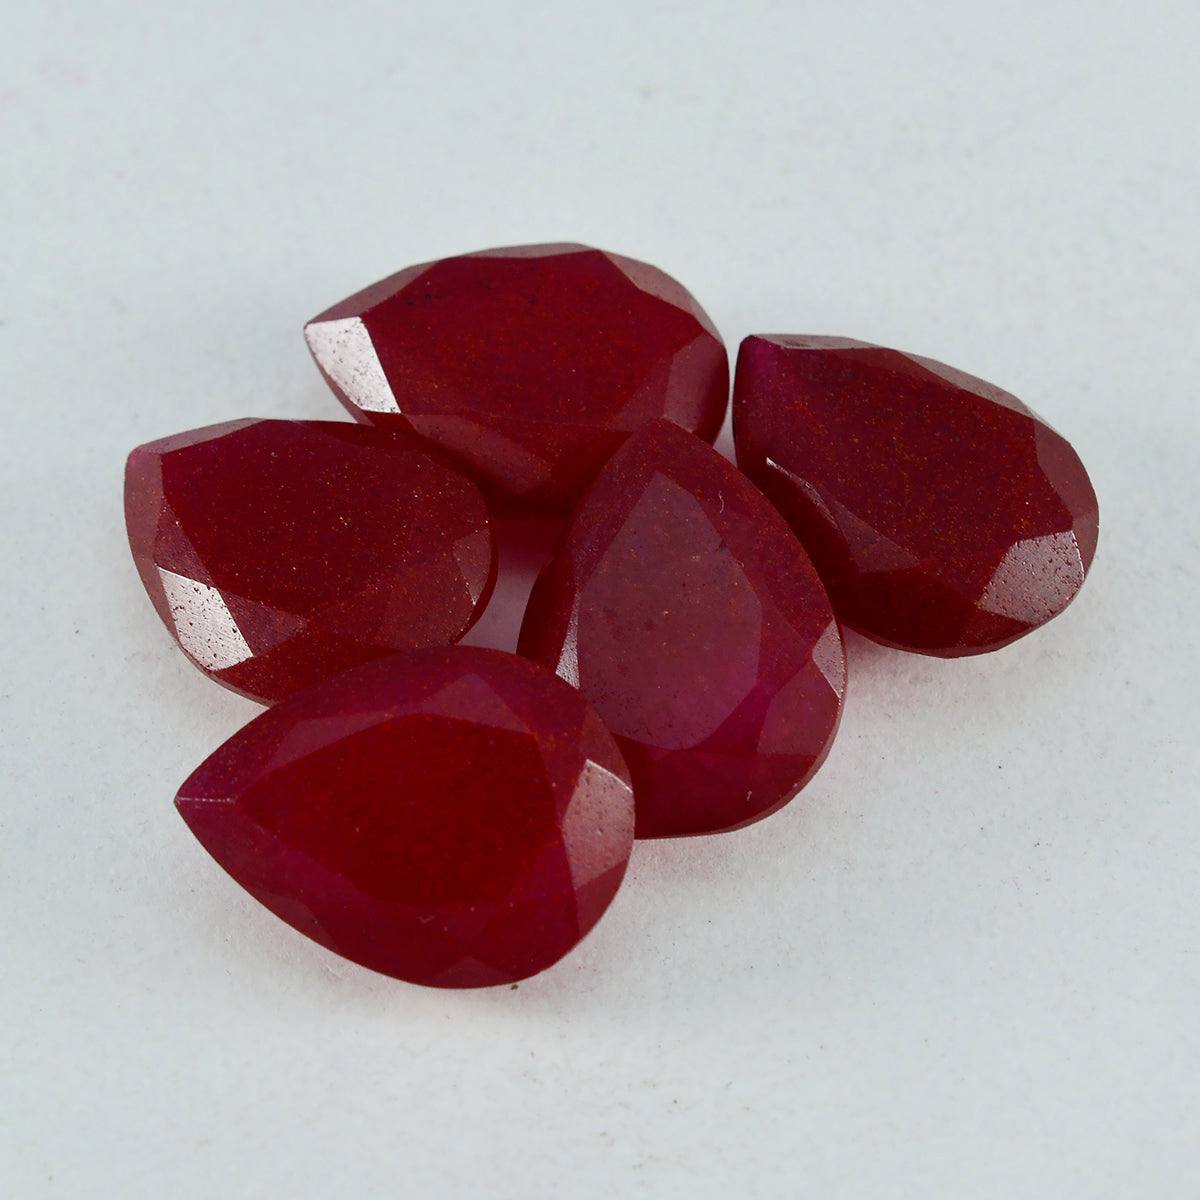 Riyogems 1PC Real Red Jasper Faceted 12x16 mm Pear Shape startling Quality Loose Stone